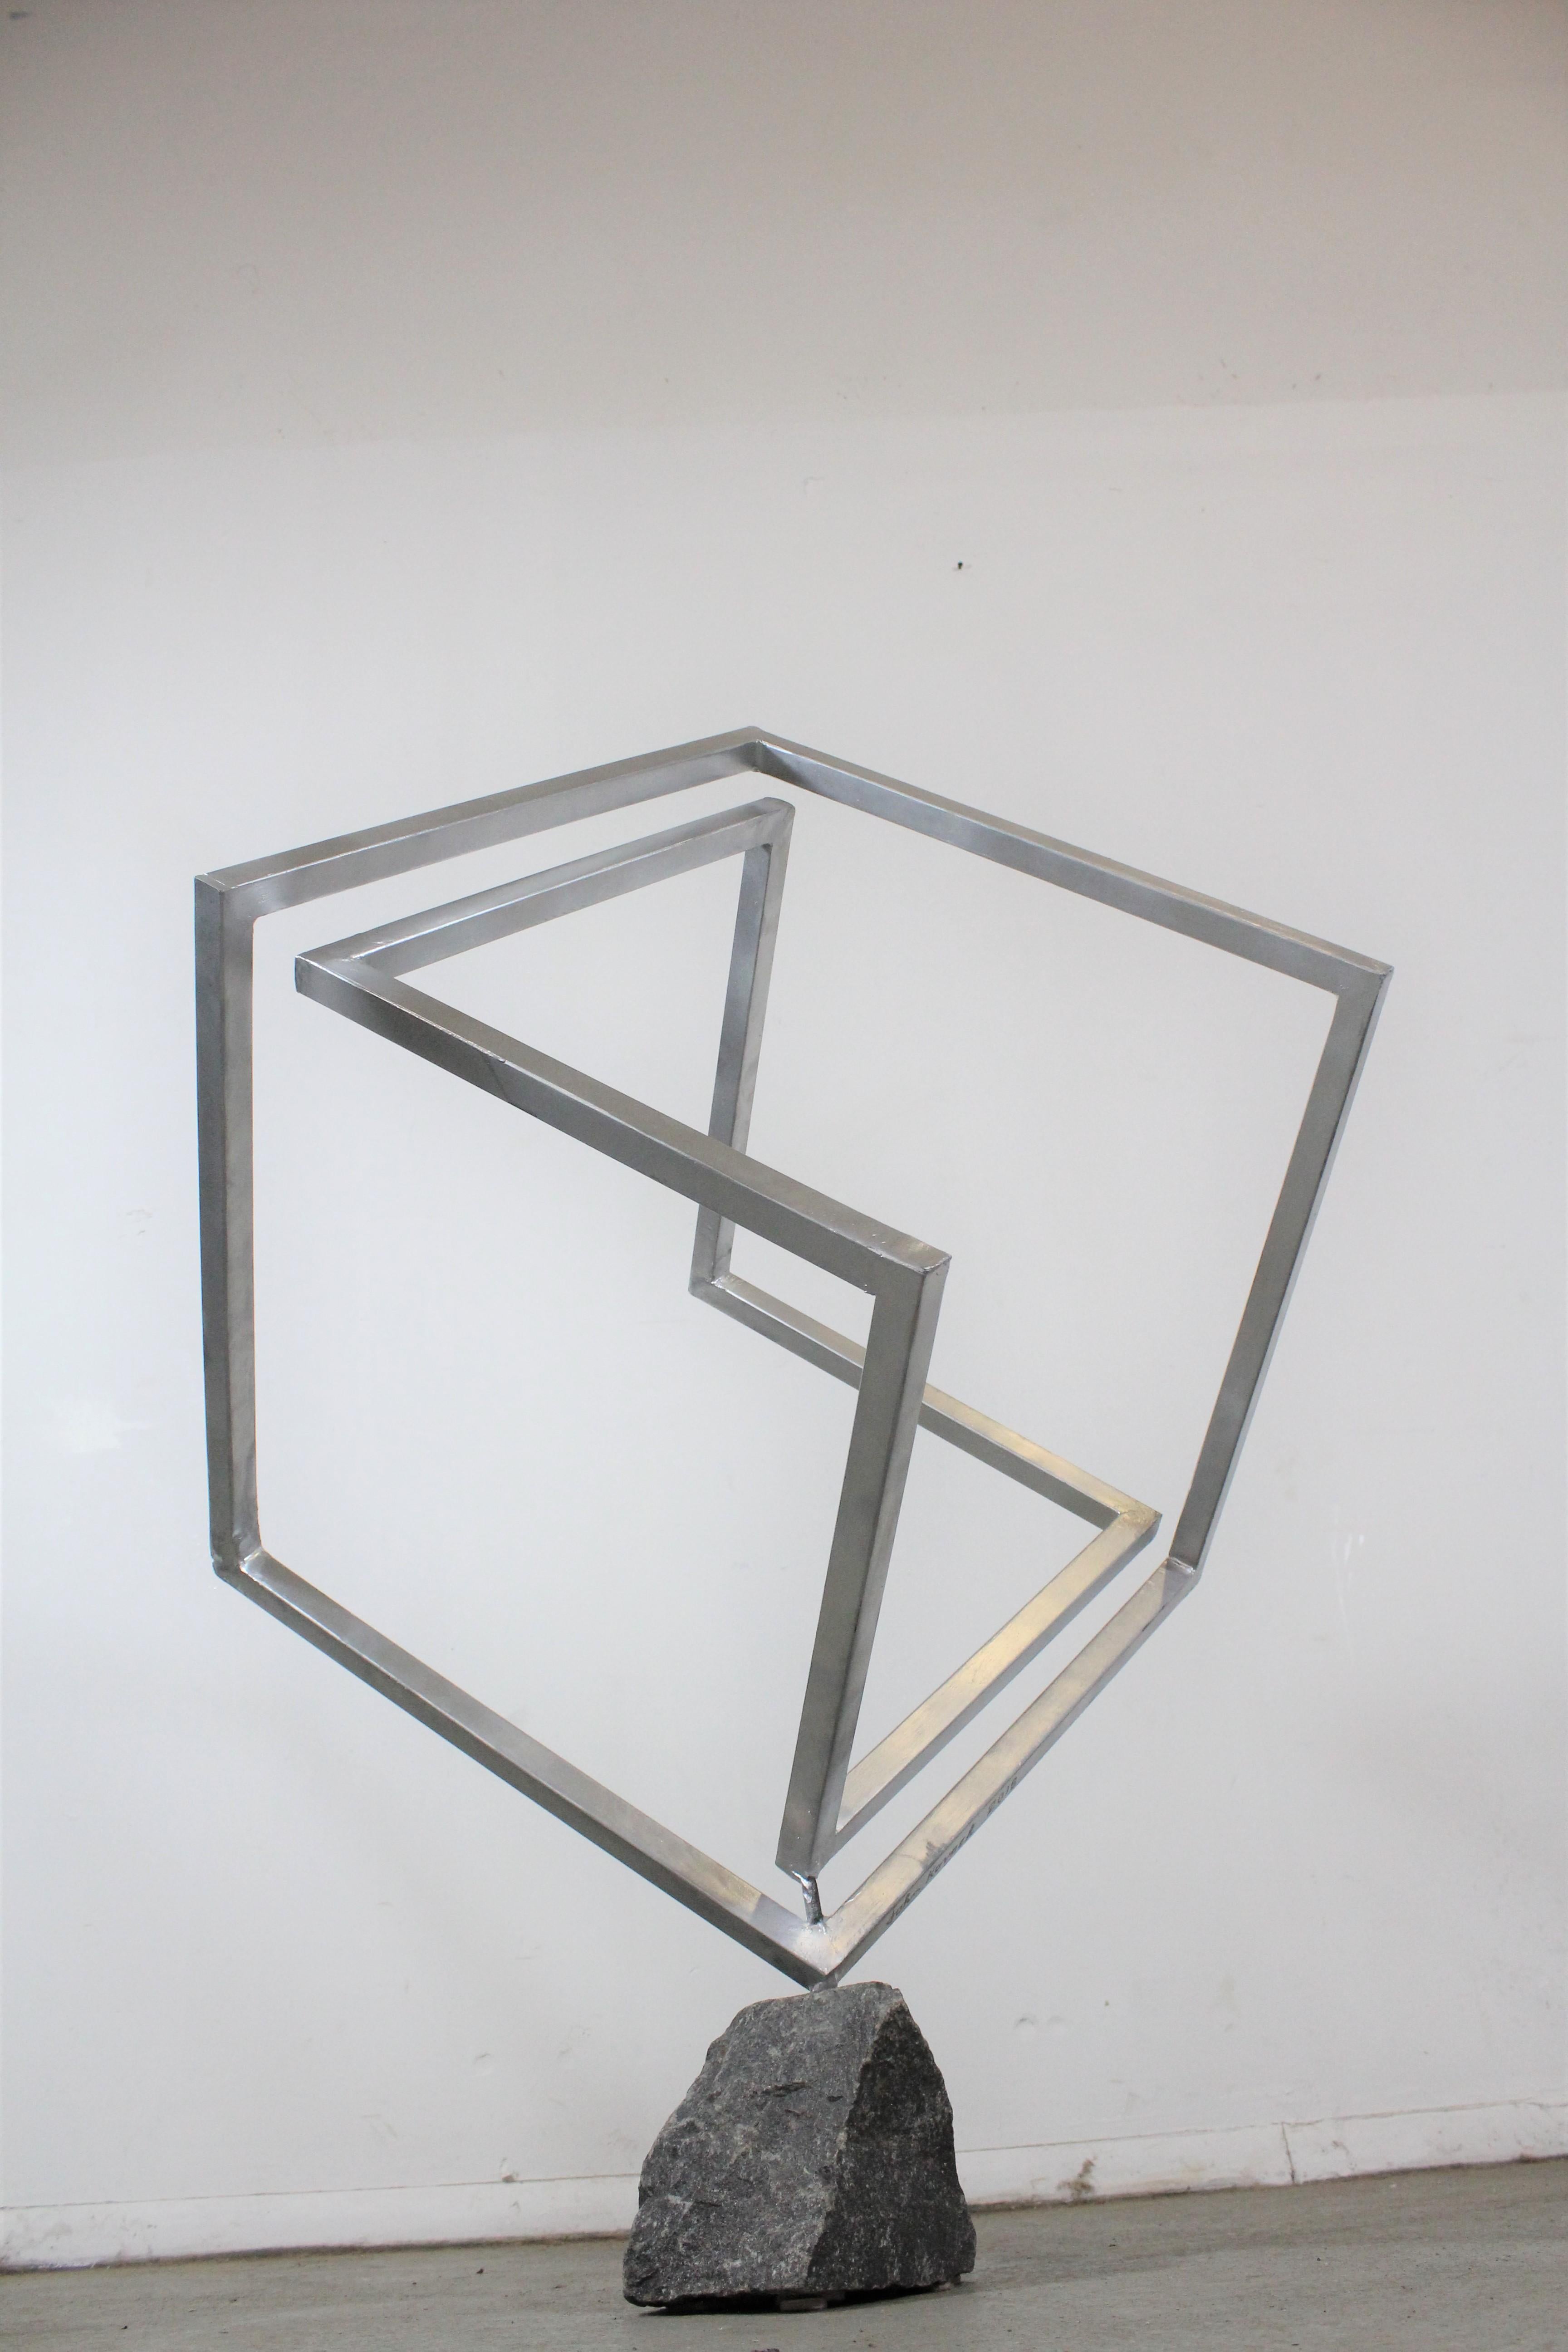 Mid-Century Modern Style 3D Cube Sculpture 
Offered is a beautifully unique sculpture. The piece is made of tube steel which has been painted silver. It is in good condition, showing some wear on the paint. The cubic structure is attached to a solid